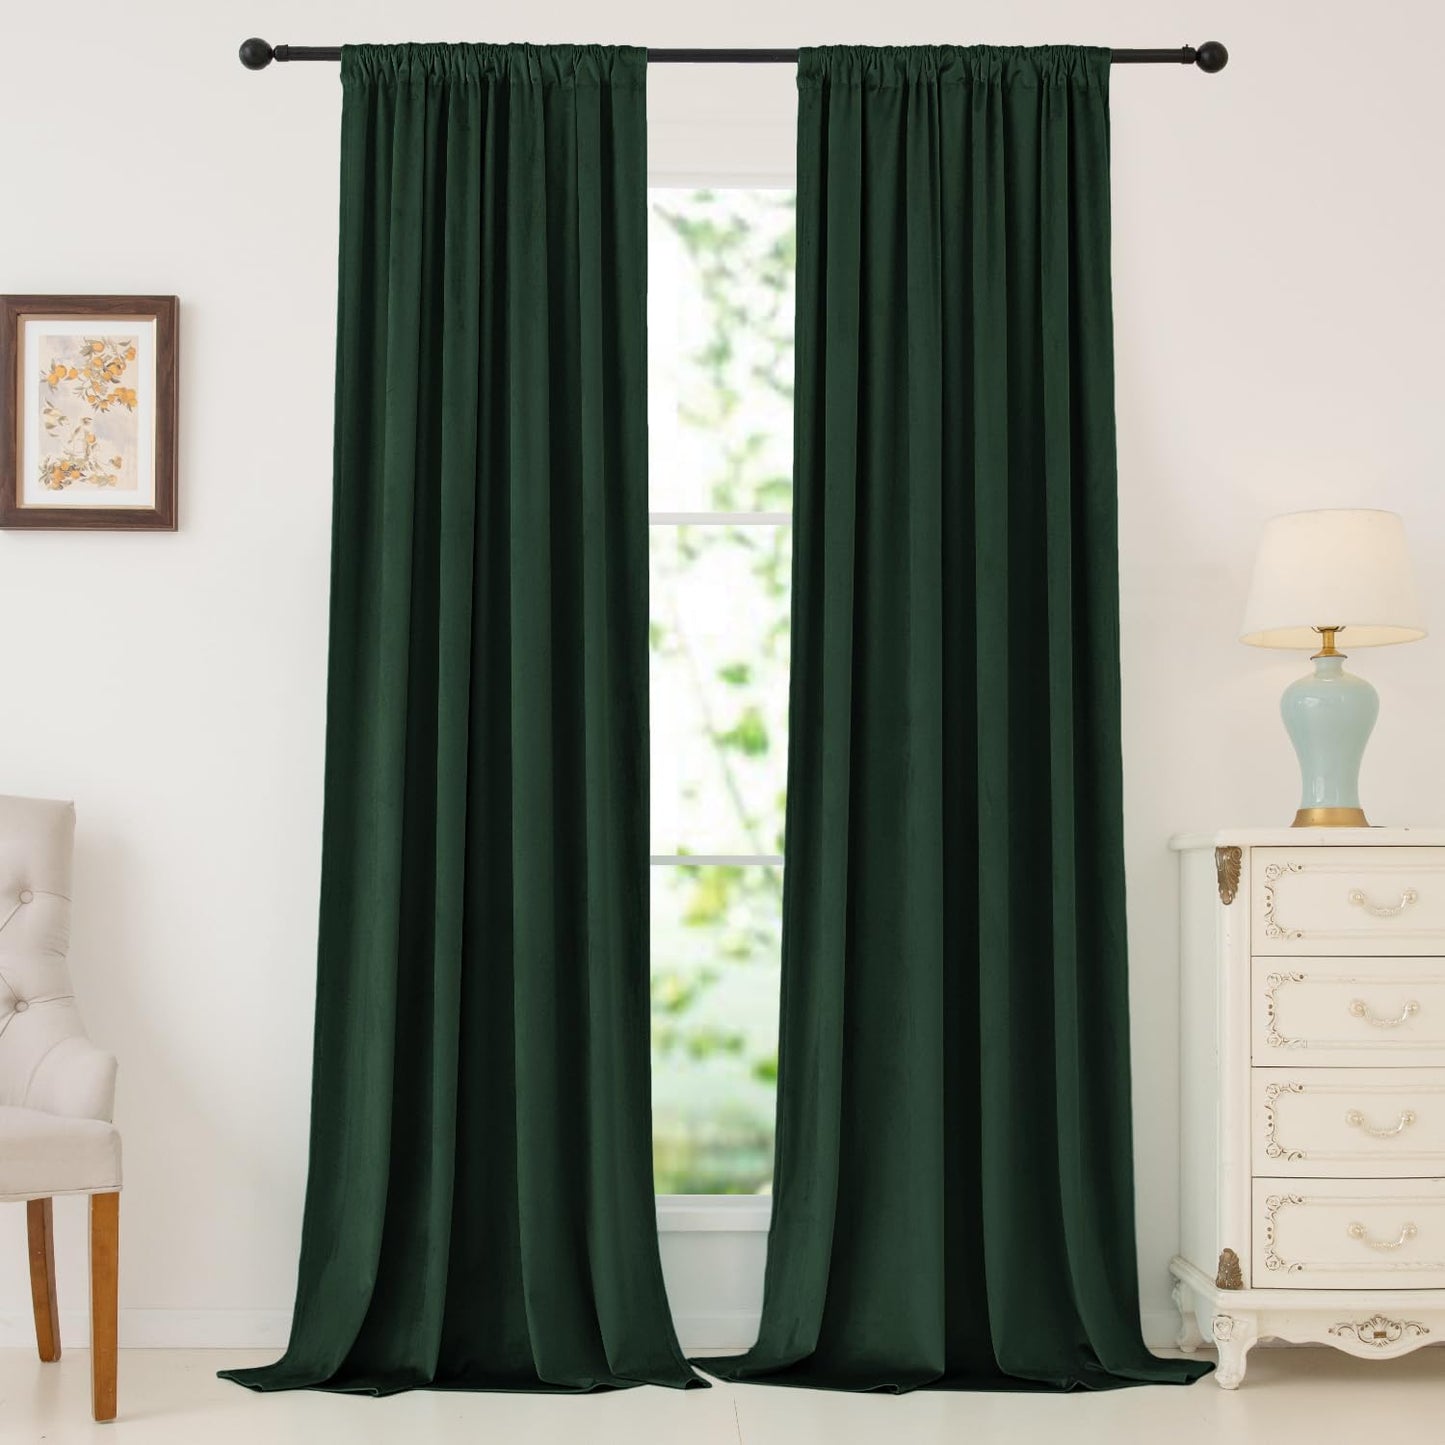 Nanbowang Green Velvet Curtains 63 Inches Long Dark Green Light Blocking Rod Pocket Window Curtain Panels Set of 2 Heat Insulated Curtains Thermal Curtain Panels for Bedroom  nanbowang Dark Green 52"X120" 